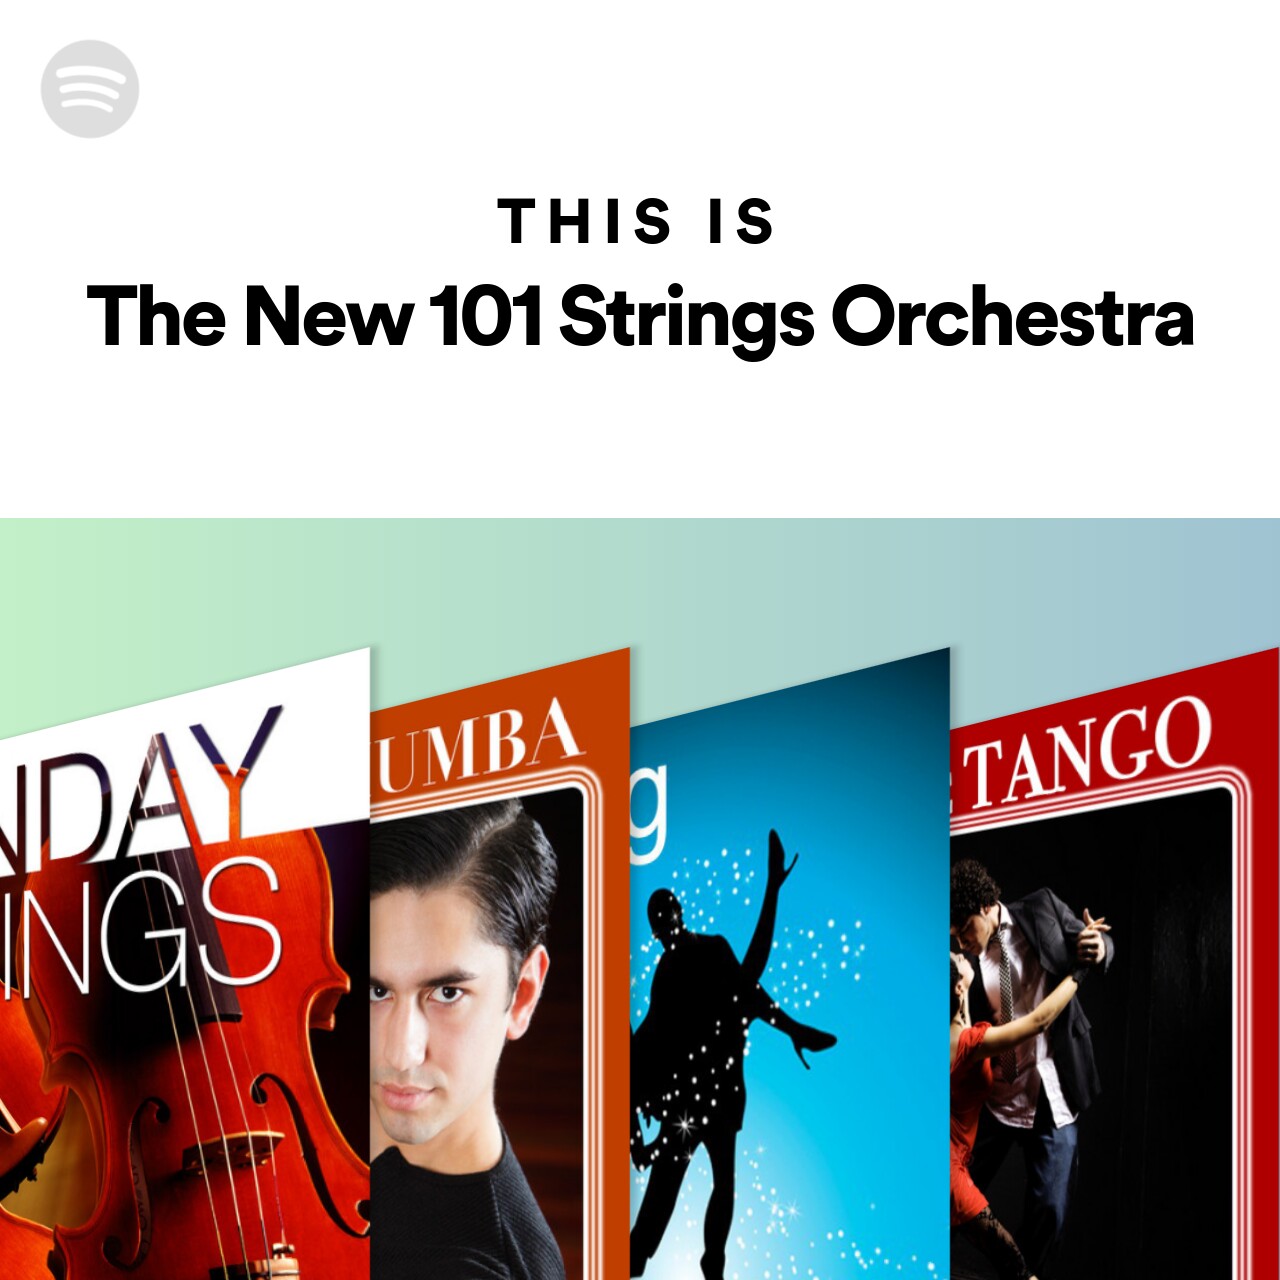 This Is The New 101 Strings Orchestra